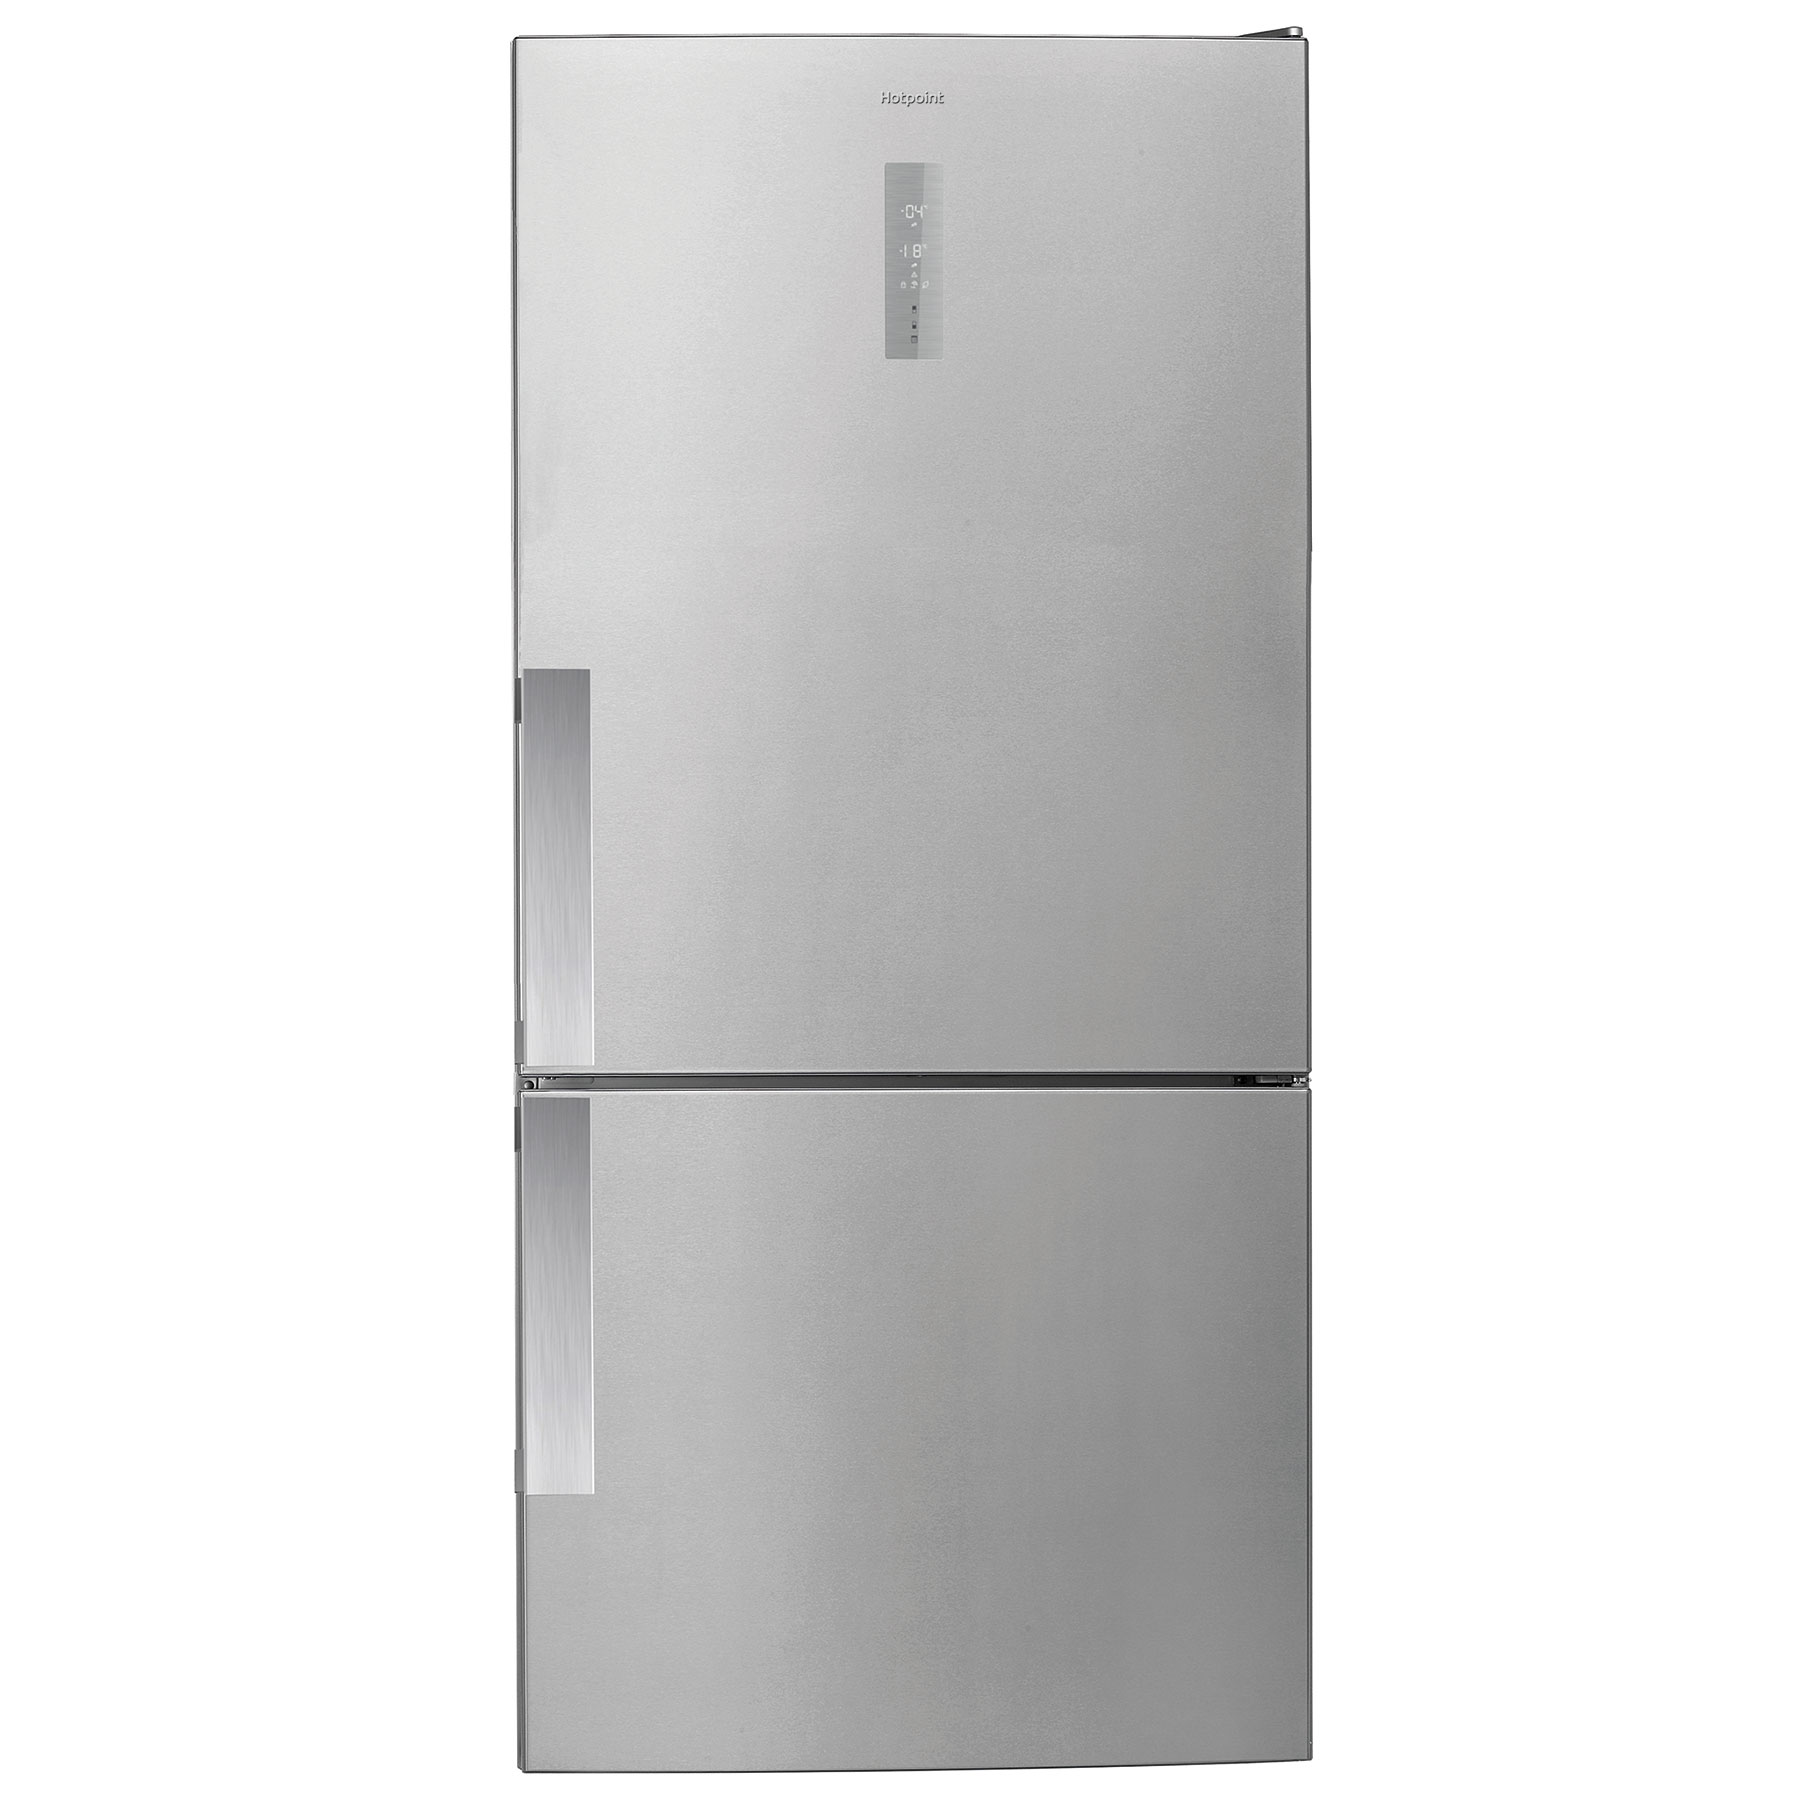 Image of Hotpoint H84BE72X 84cm American Fridge Freezer in Inox 1 86m E Rated